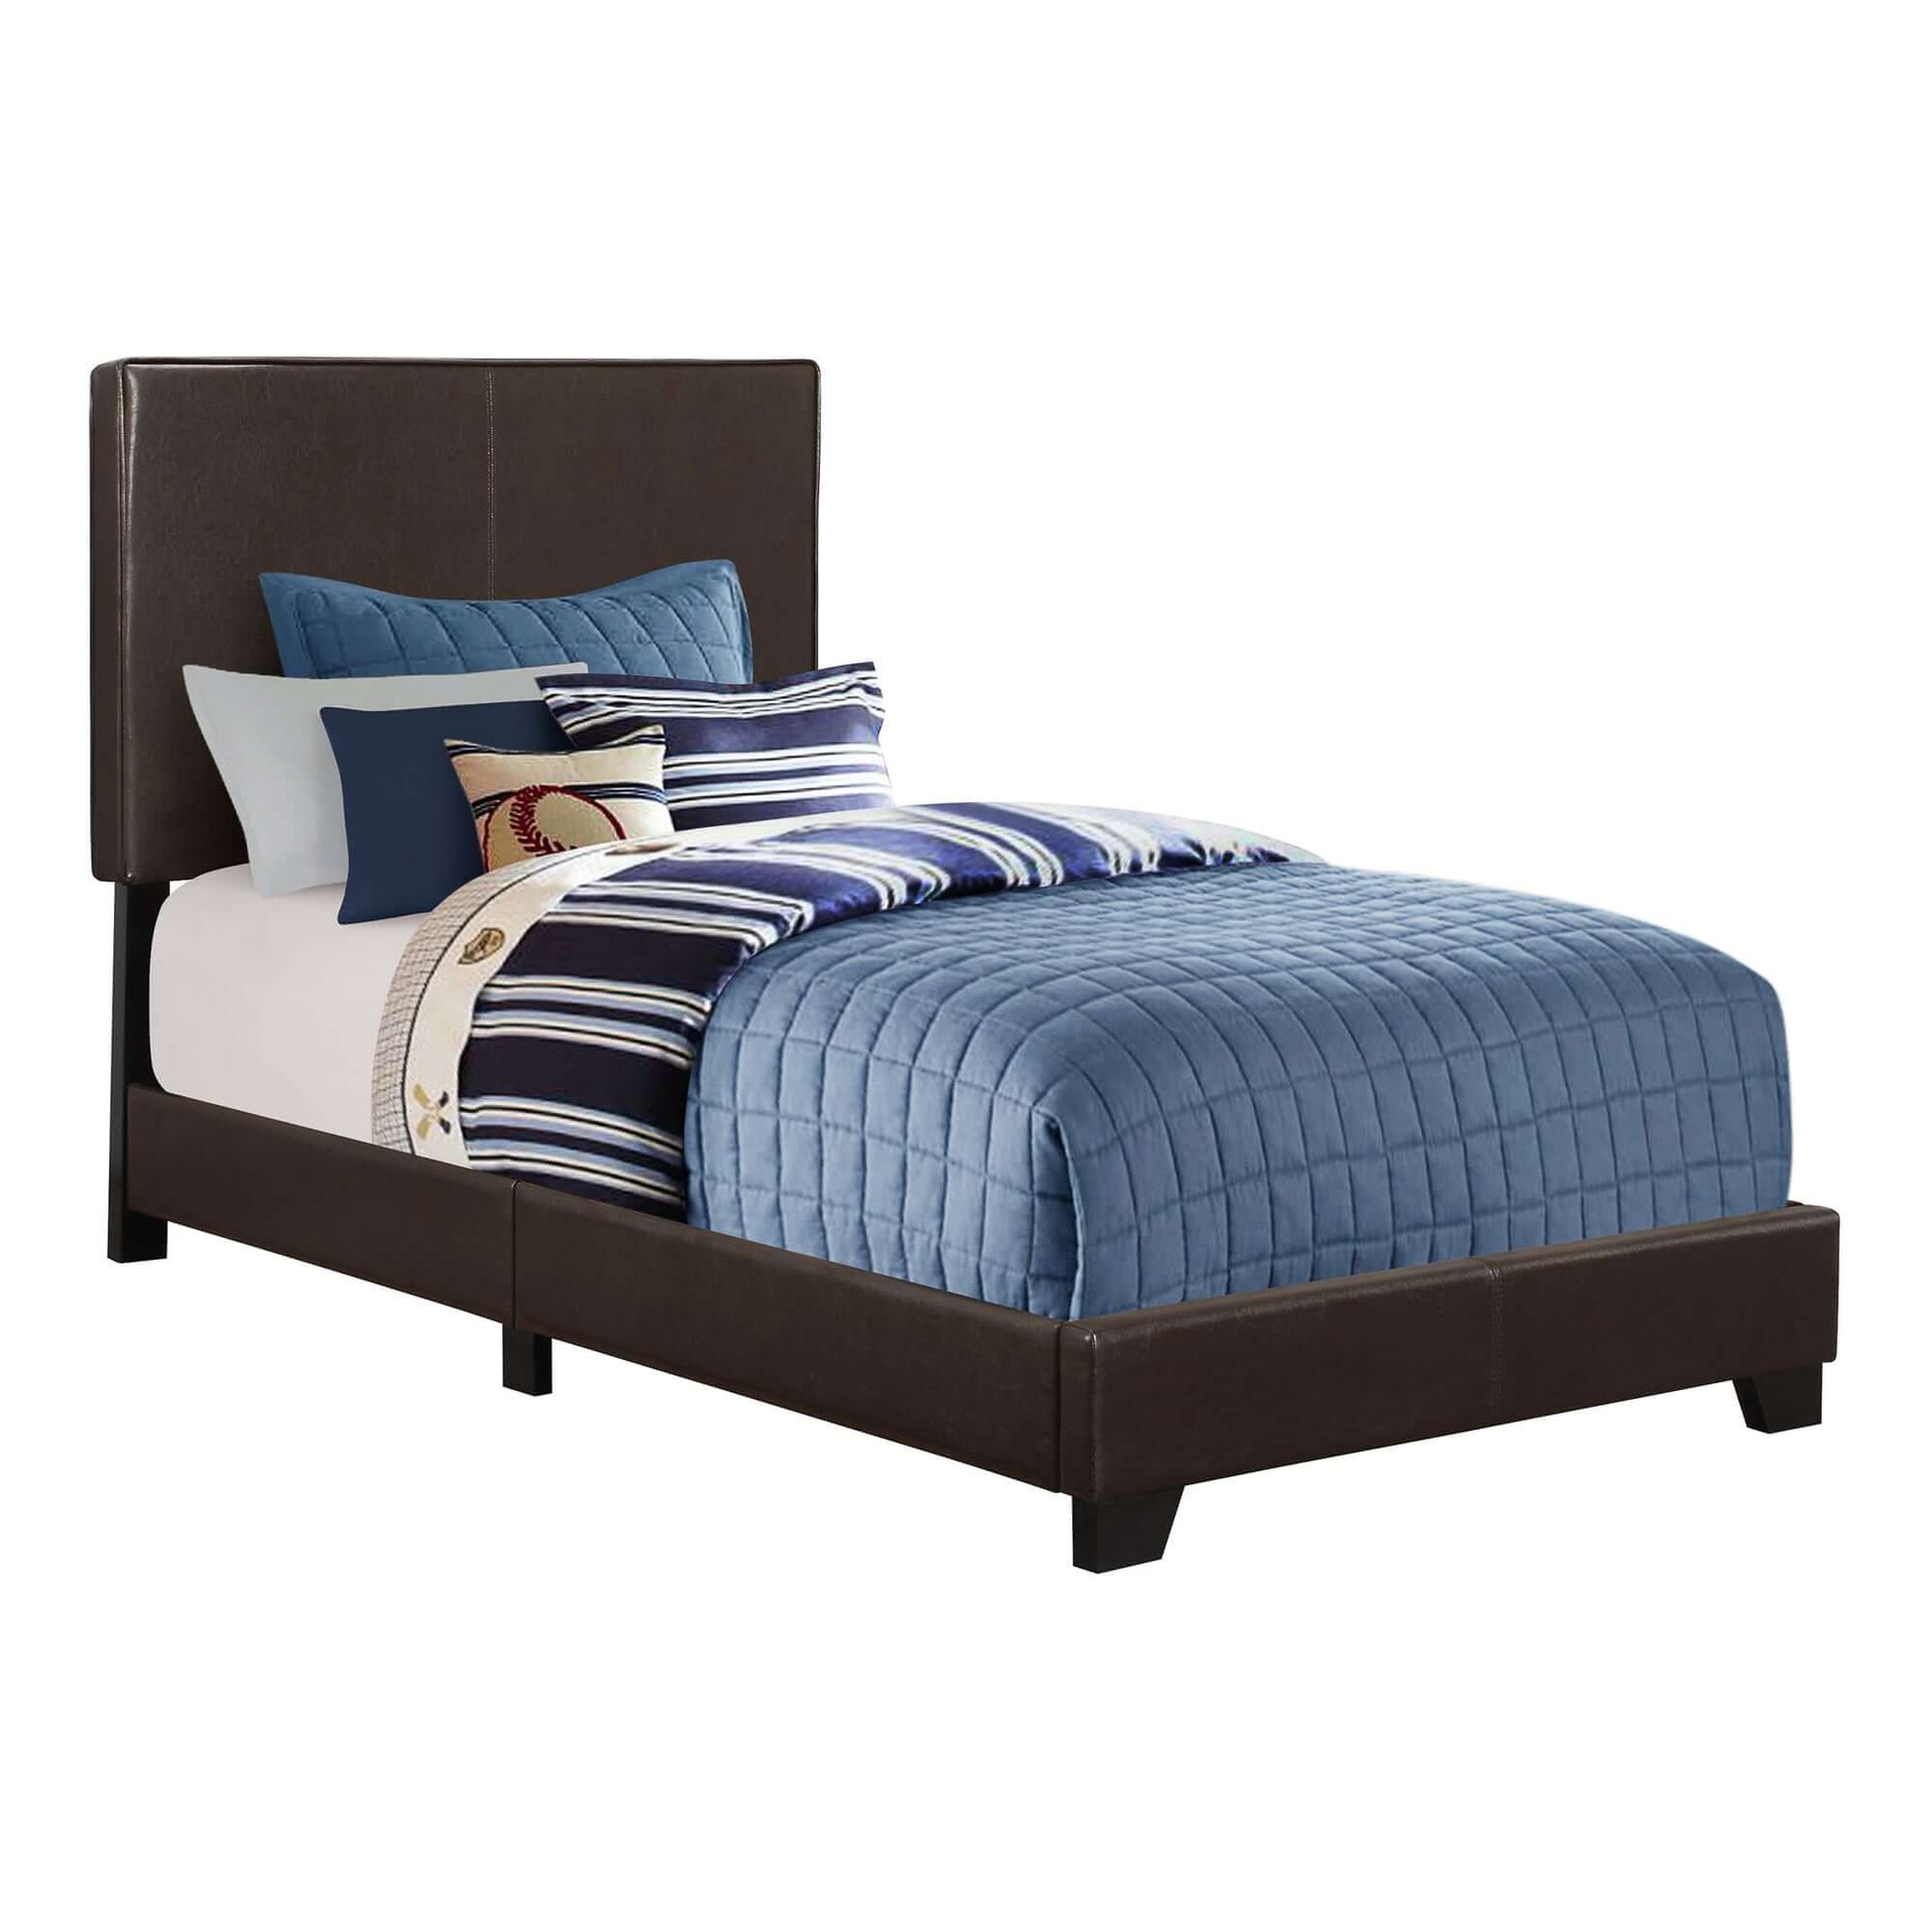 Monarch Specialties - Transitional Upholstered Bed in Dark Brown Leather-Look - I 5910F